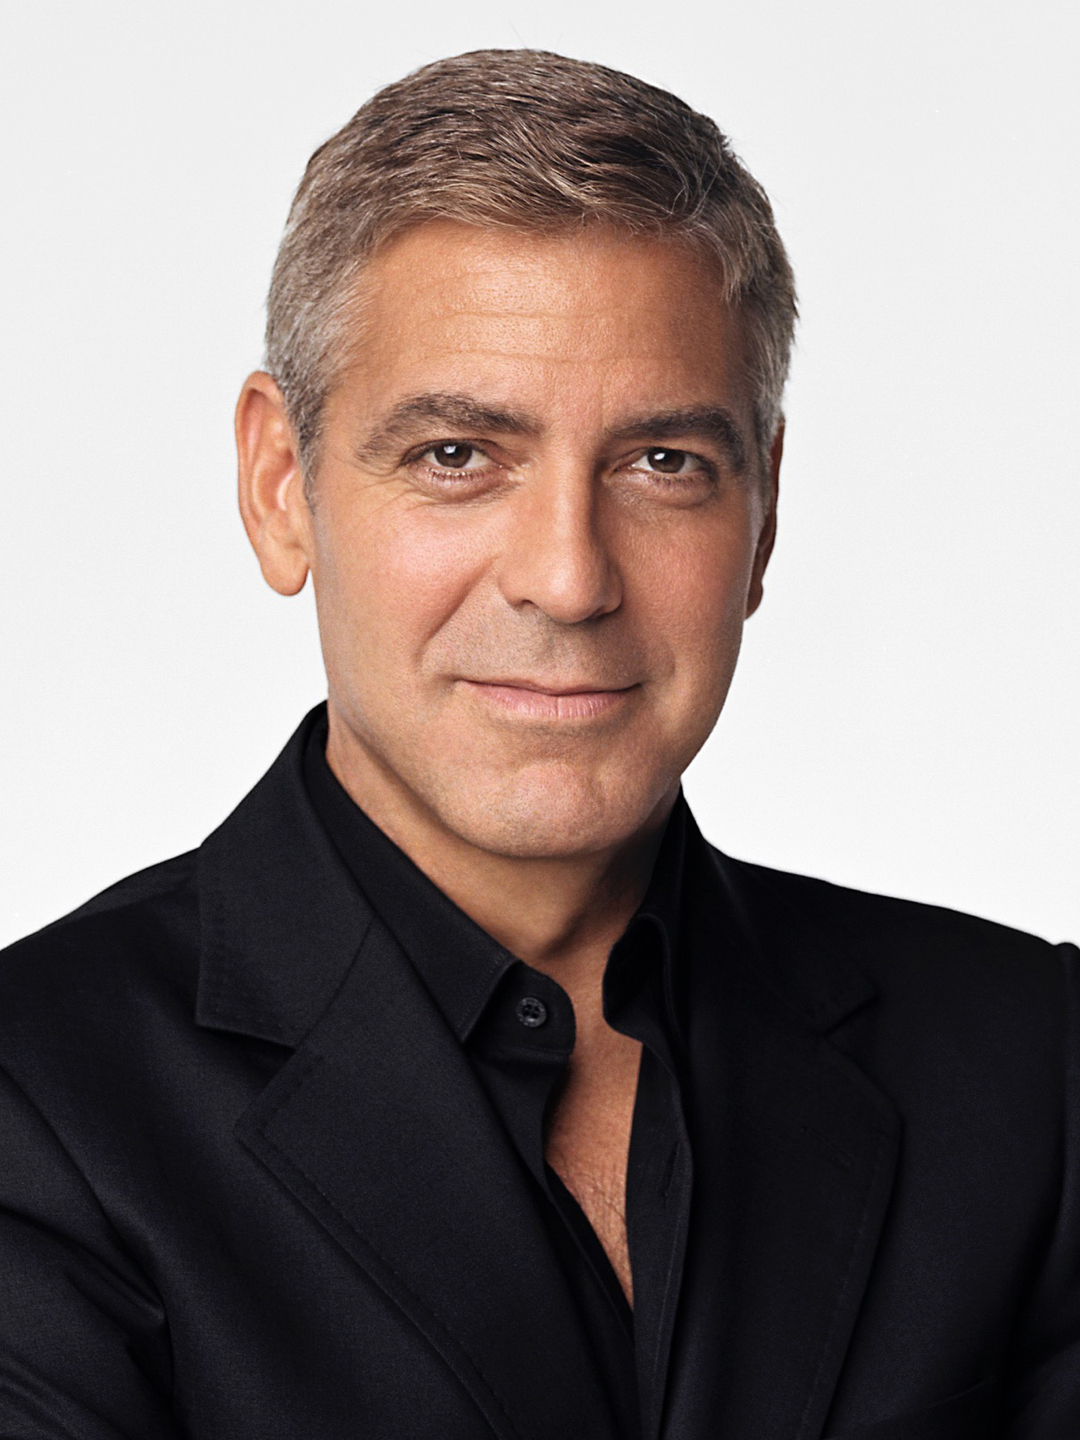 George Clooney in real life